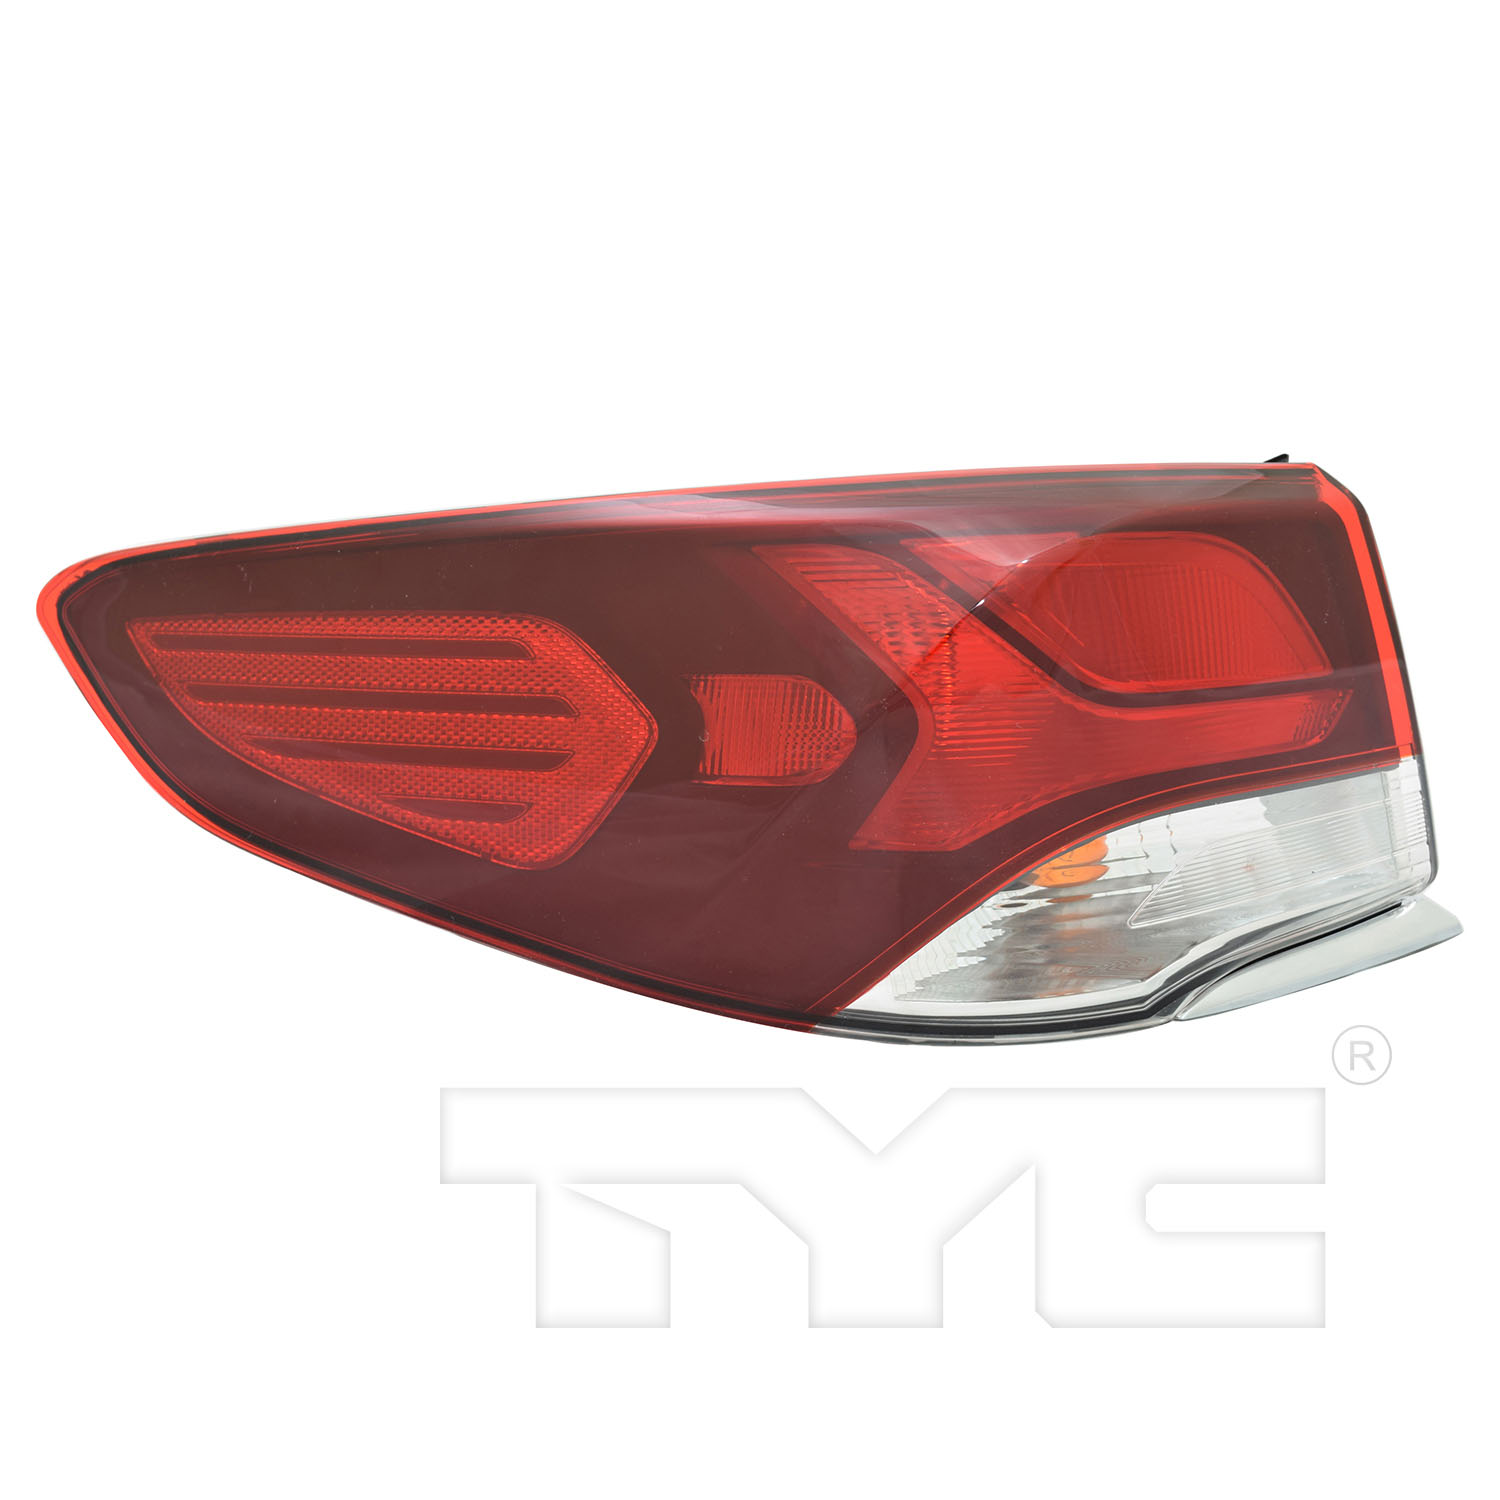 Aftermarket TAILLIGHTS for HYUNDAI - SONATA, SONATA,18-19,LT Taillamp assy outer